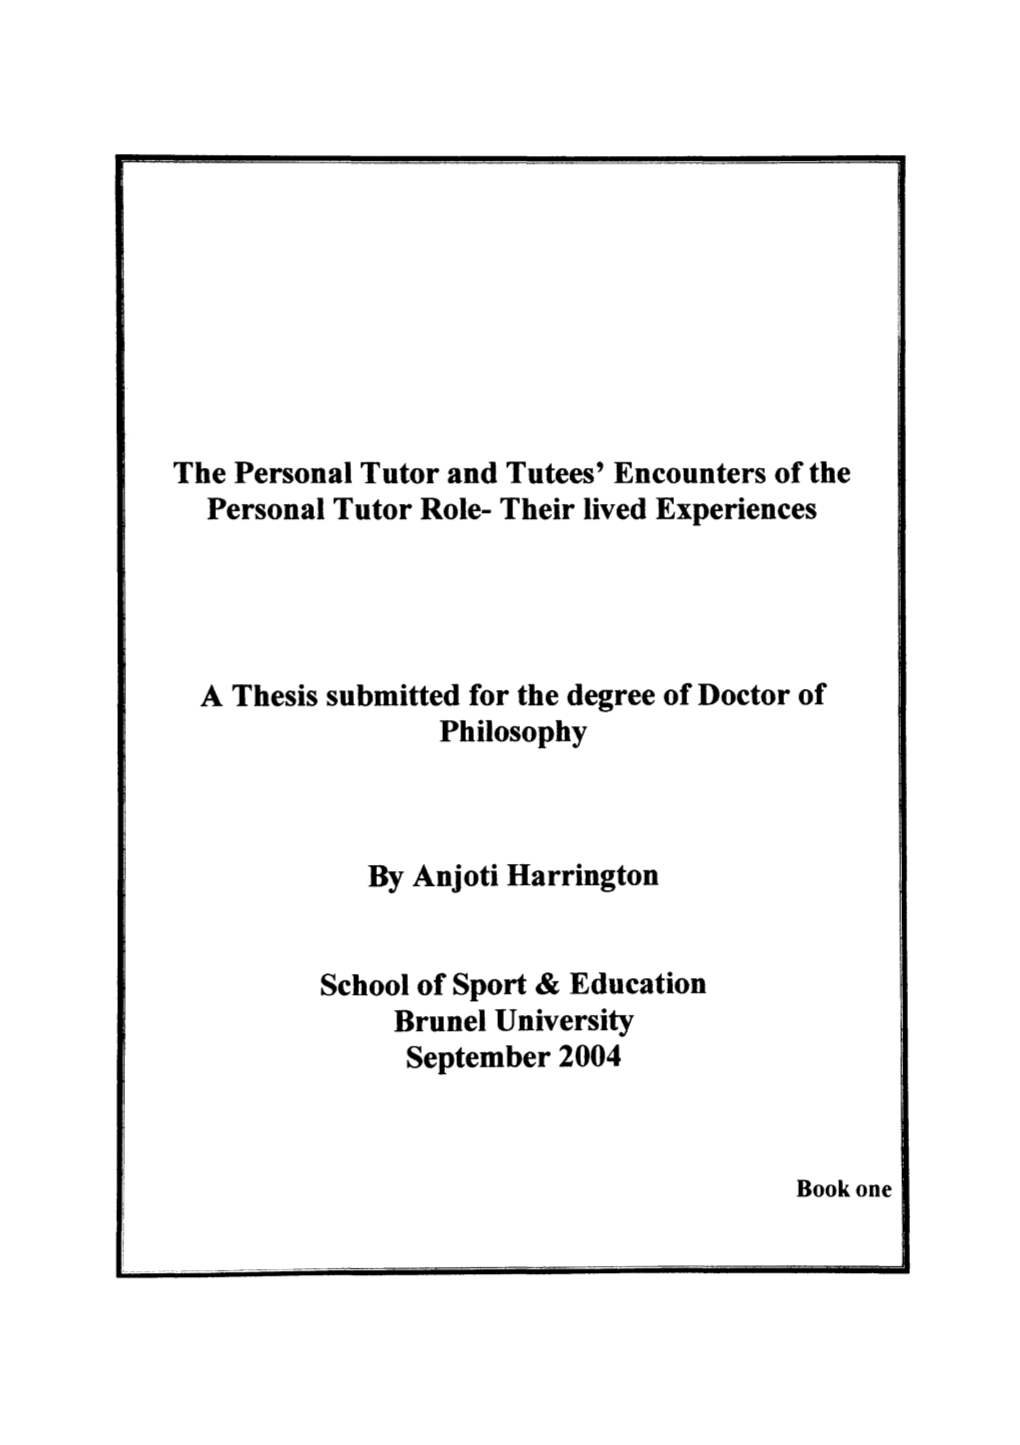 The Personal Tutor and Tutees' Encounters of the Personal Tutor Role- Their Lived Experiences